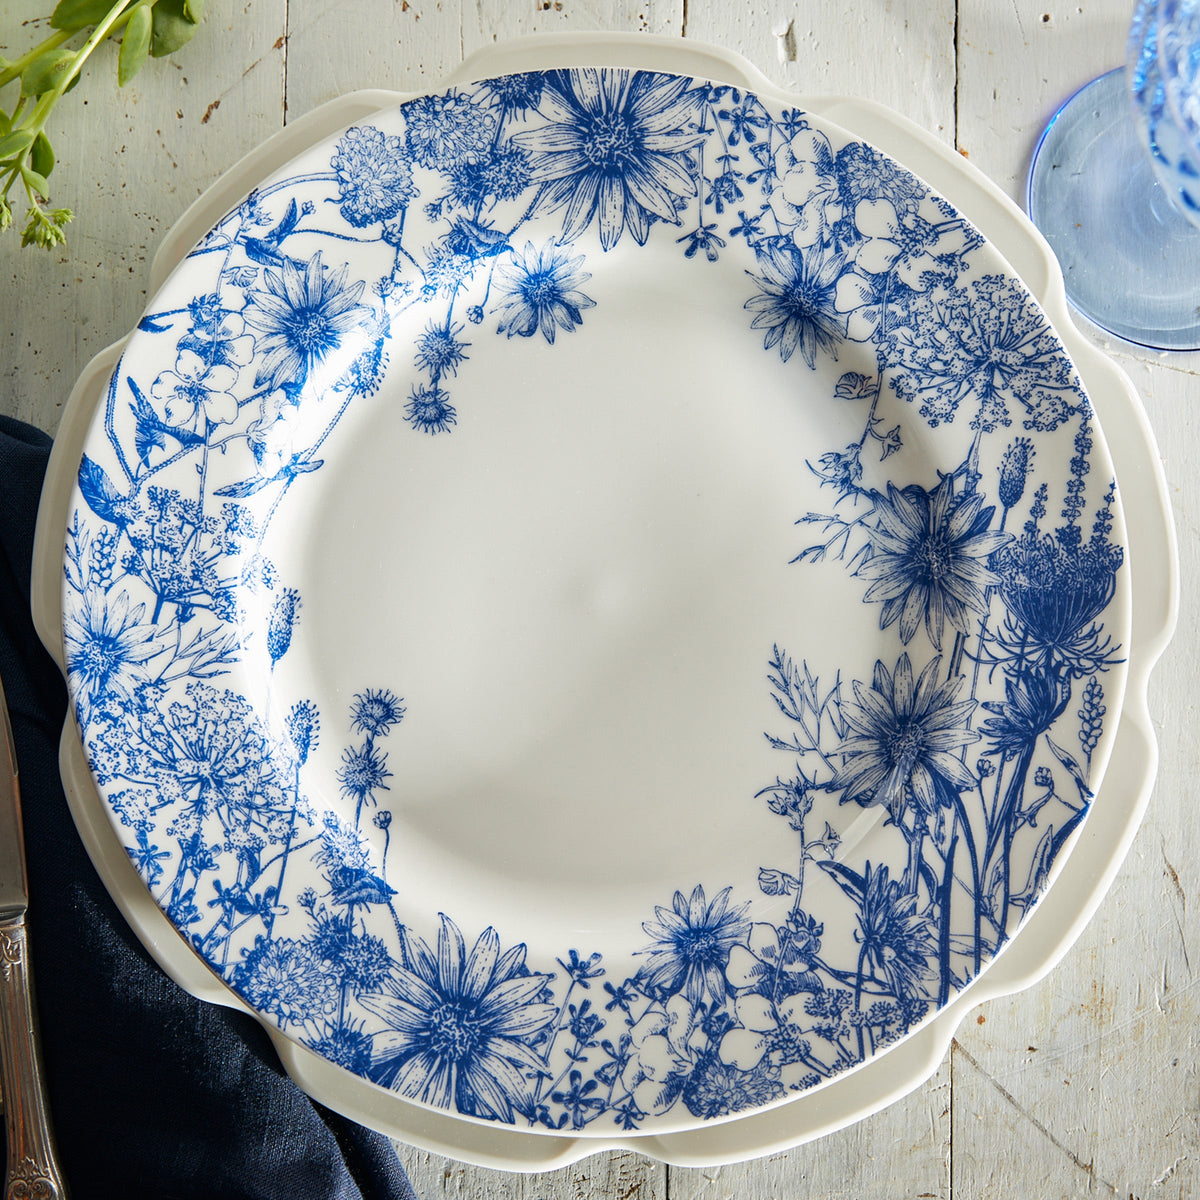 A Summer Blues Rimmed Dinner Plate by Caskata Artisanal Home, a high-fired porcelain plate with a floral pattern.